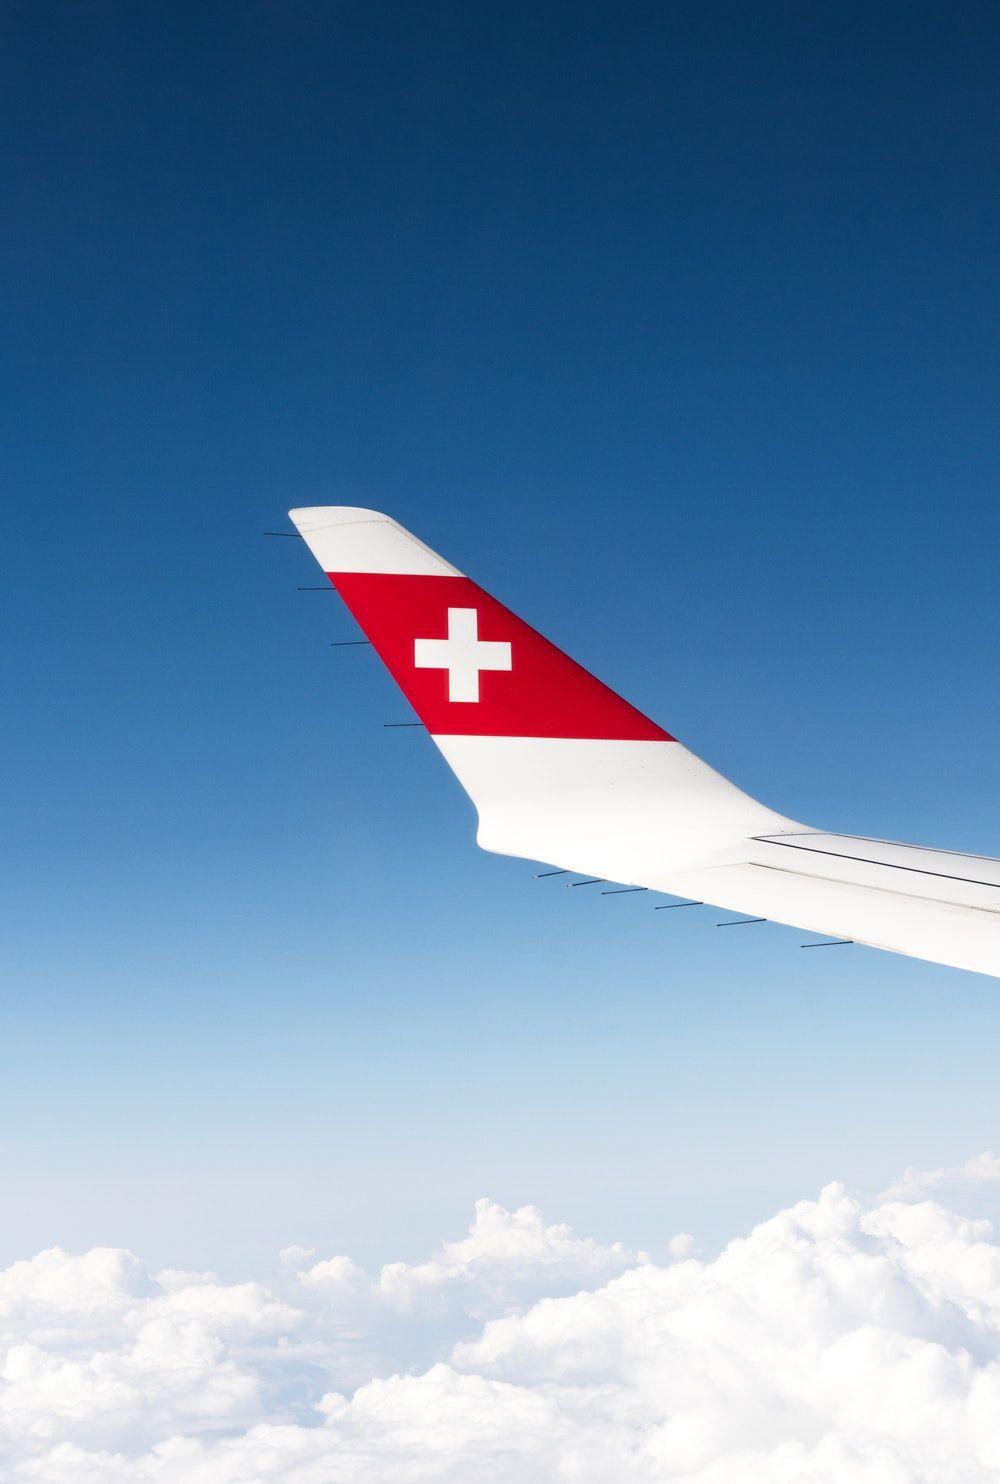 Swiss Flag Picture. Download Free Image